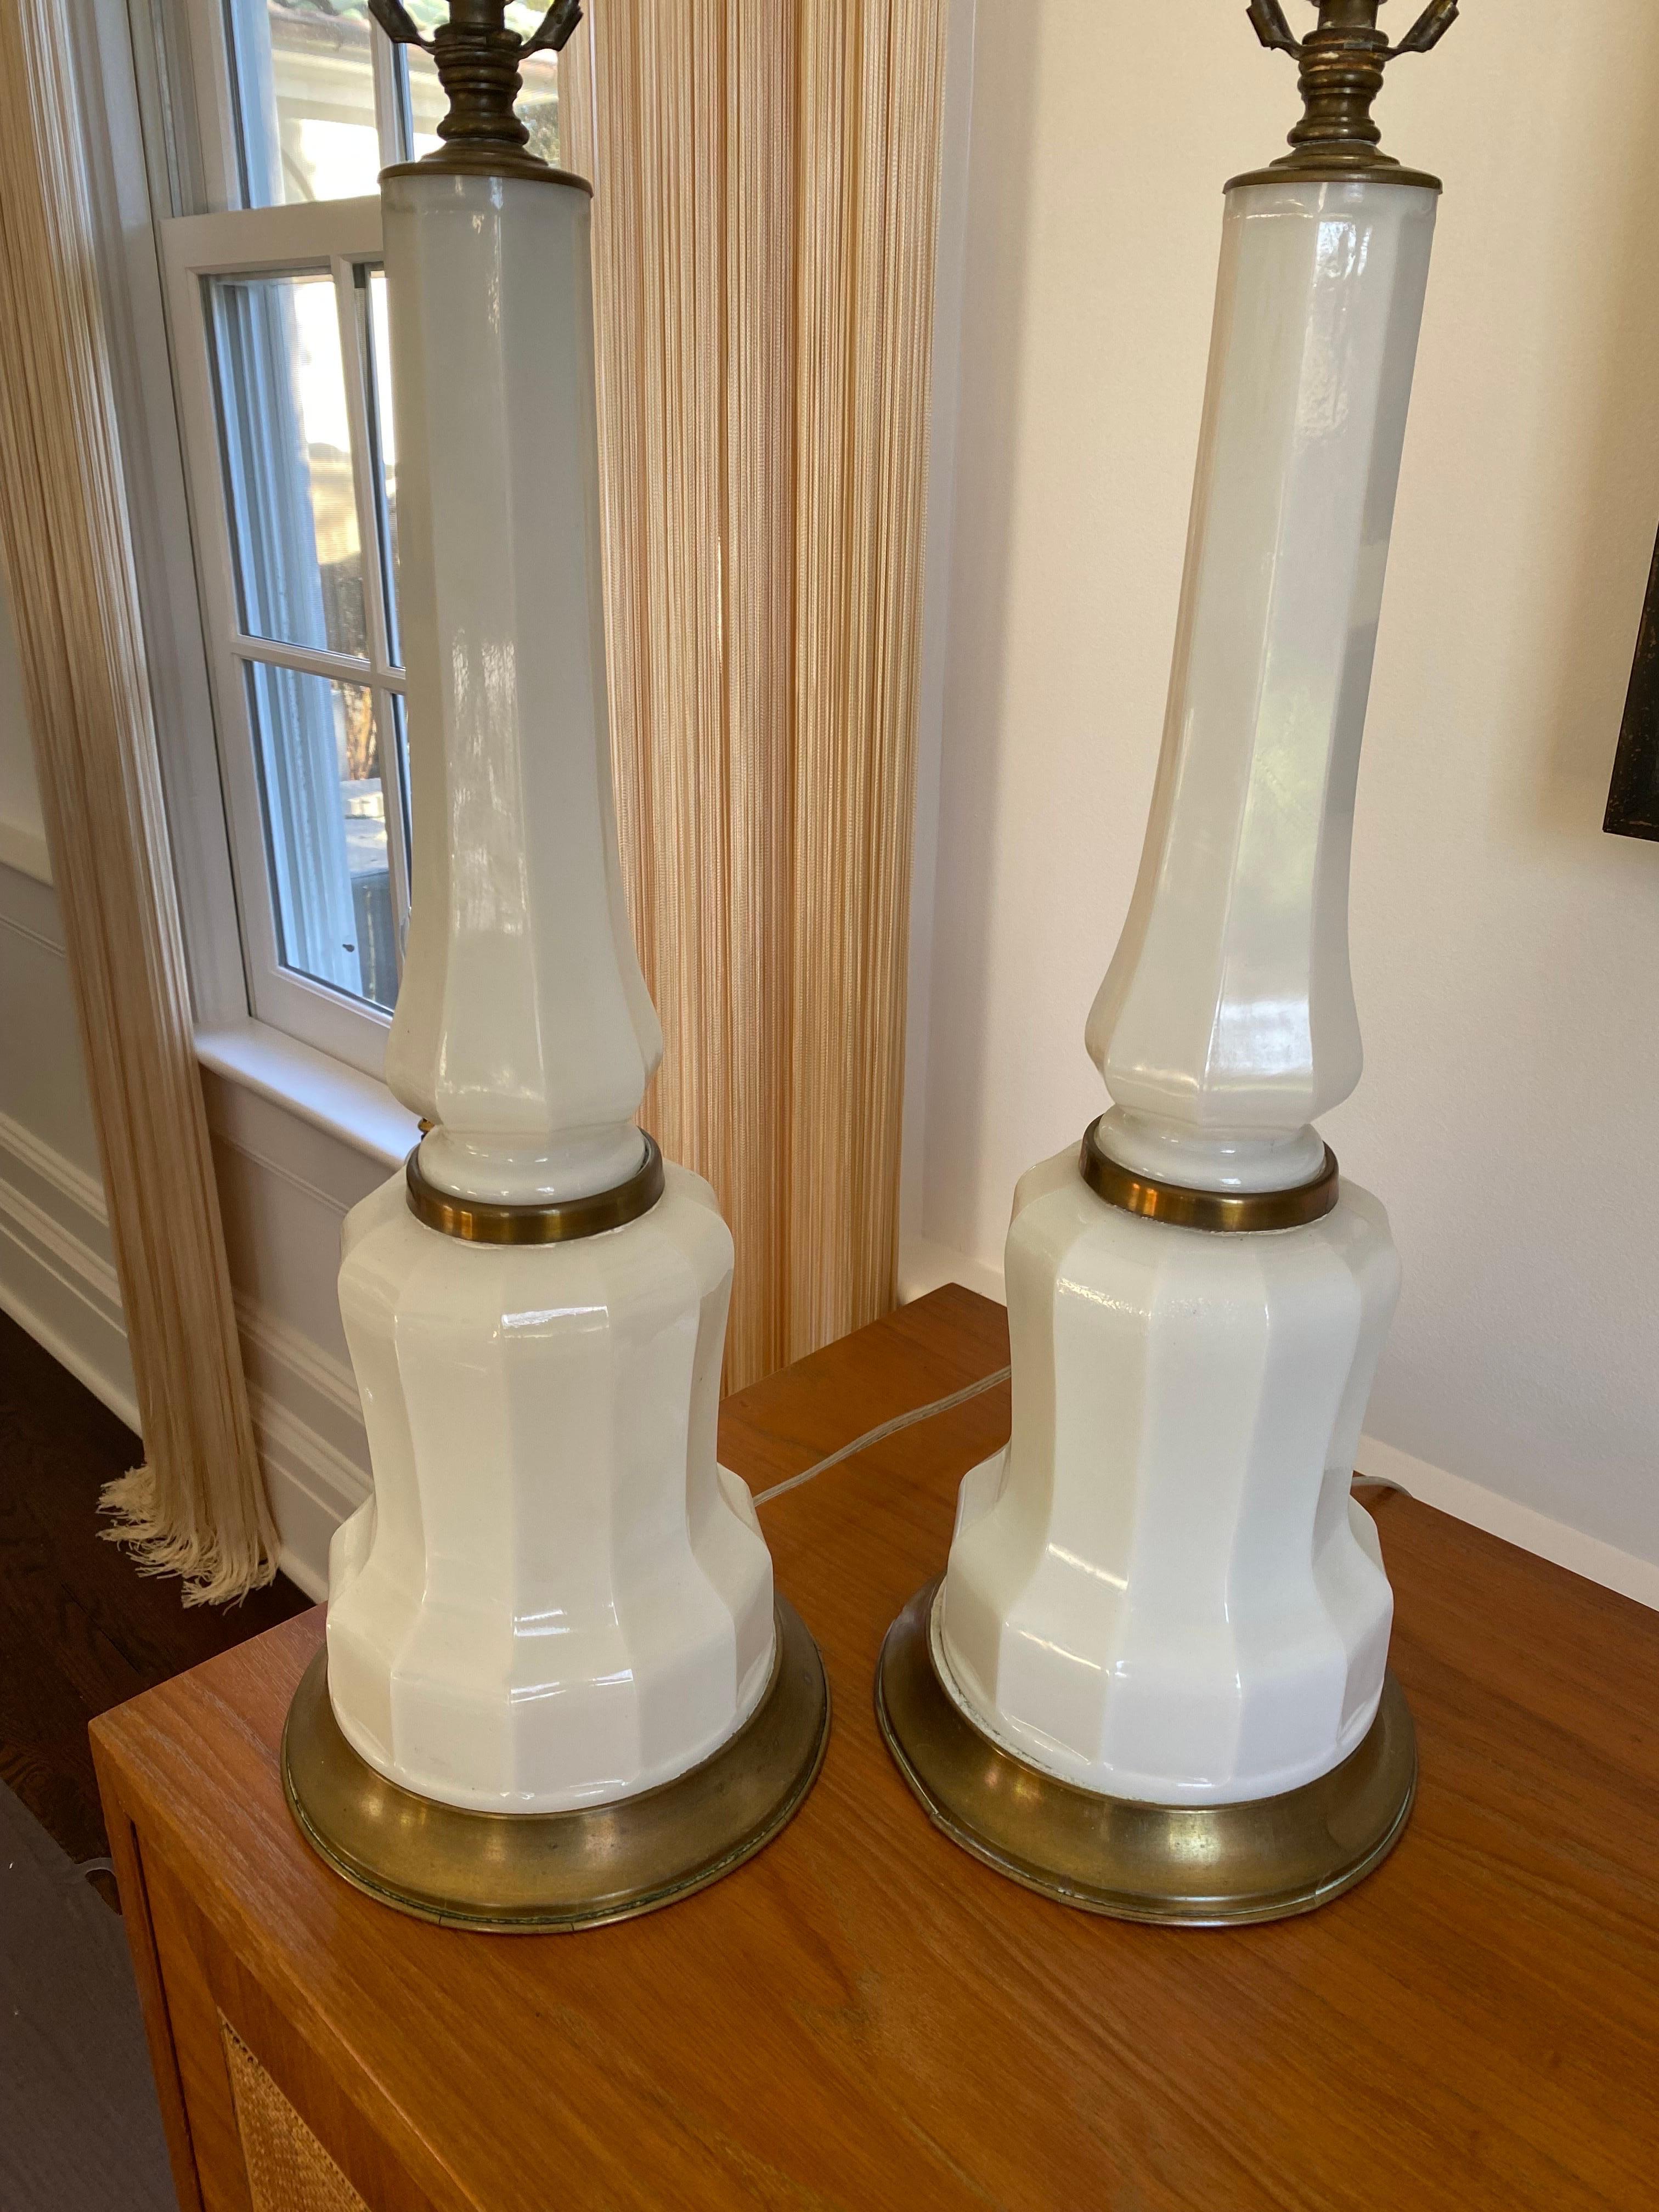 Pair Early 20th Century English Milk Glass Lamps. 
A lovely pair of white milk glass lamps with brass fittings. Early 1900s. Re-wired, working. 
Suggested 60 watt bulbs. No shades.

32 5/8